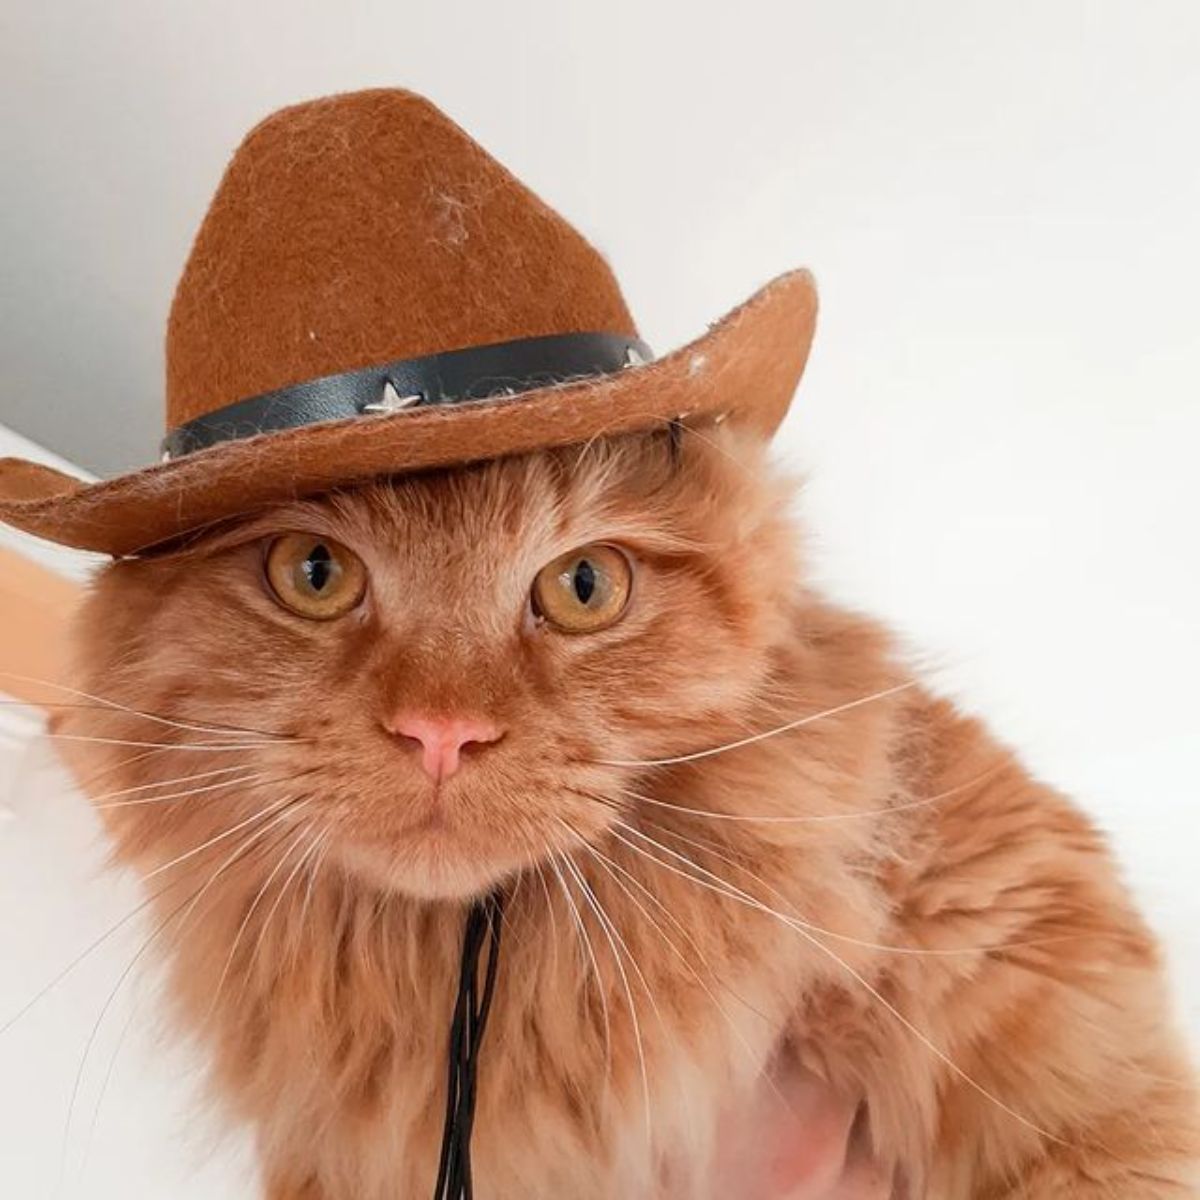 A ginger maine coon weaing a small brown cowboy hat.